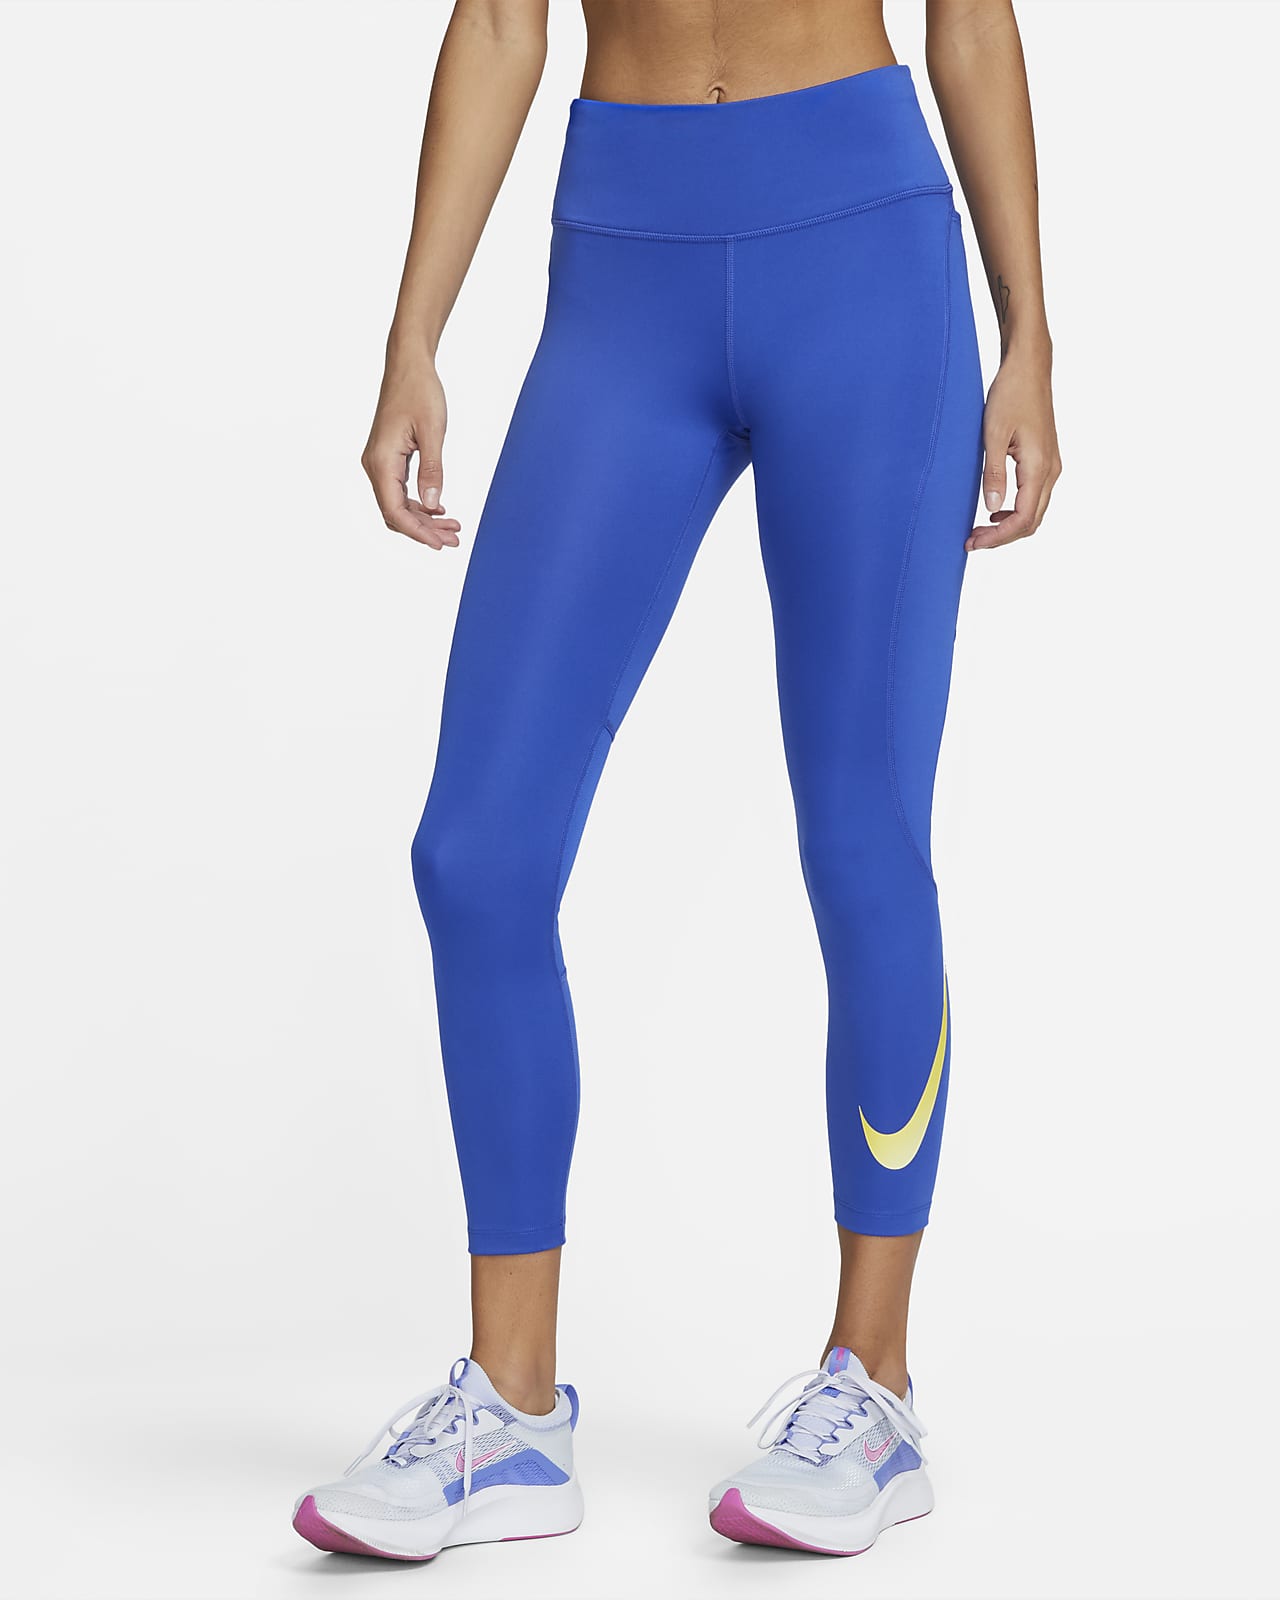 Nike DF Run Division Mid-Rise Running Tights - Running tights Women's, Free EU Delivery